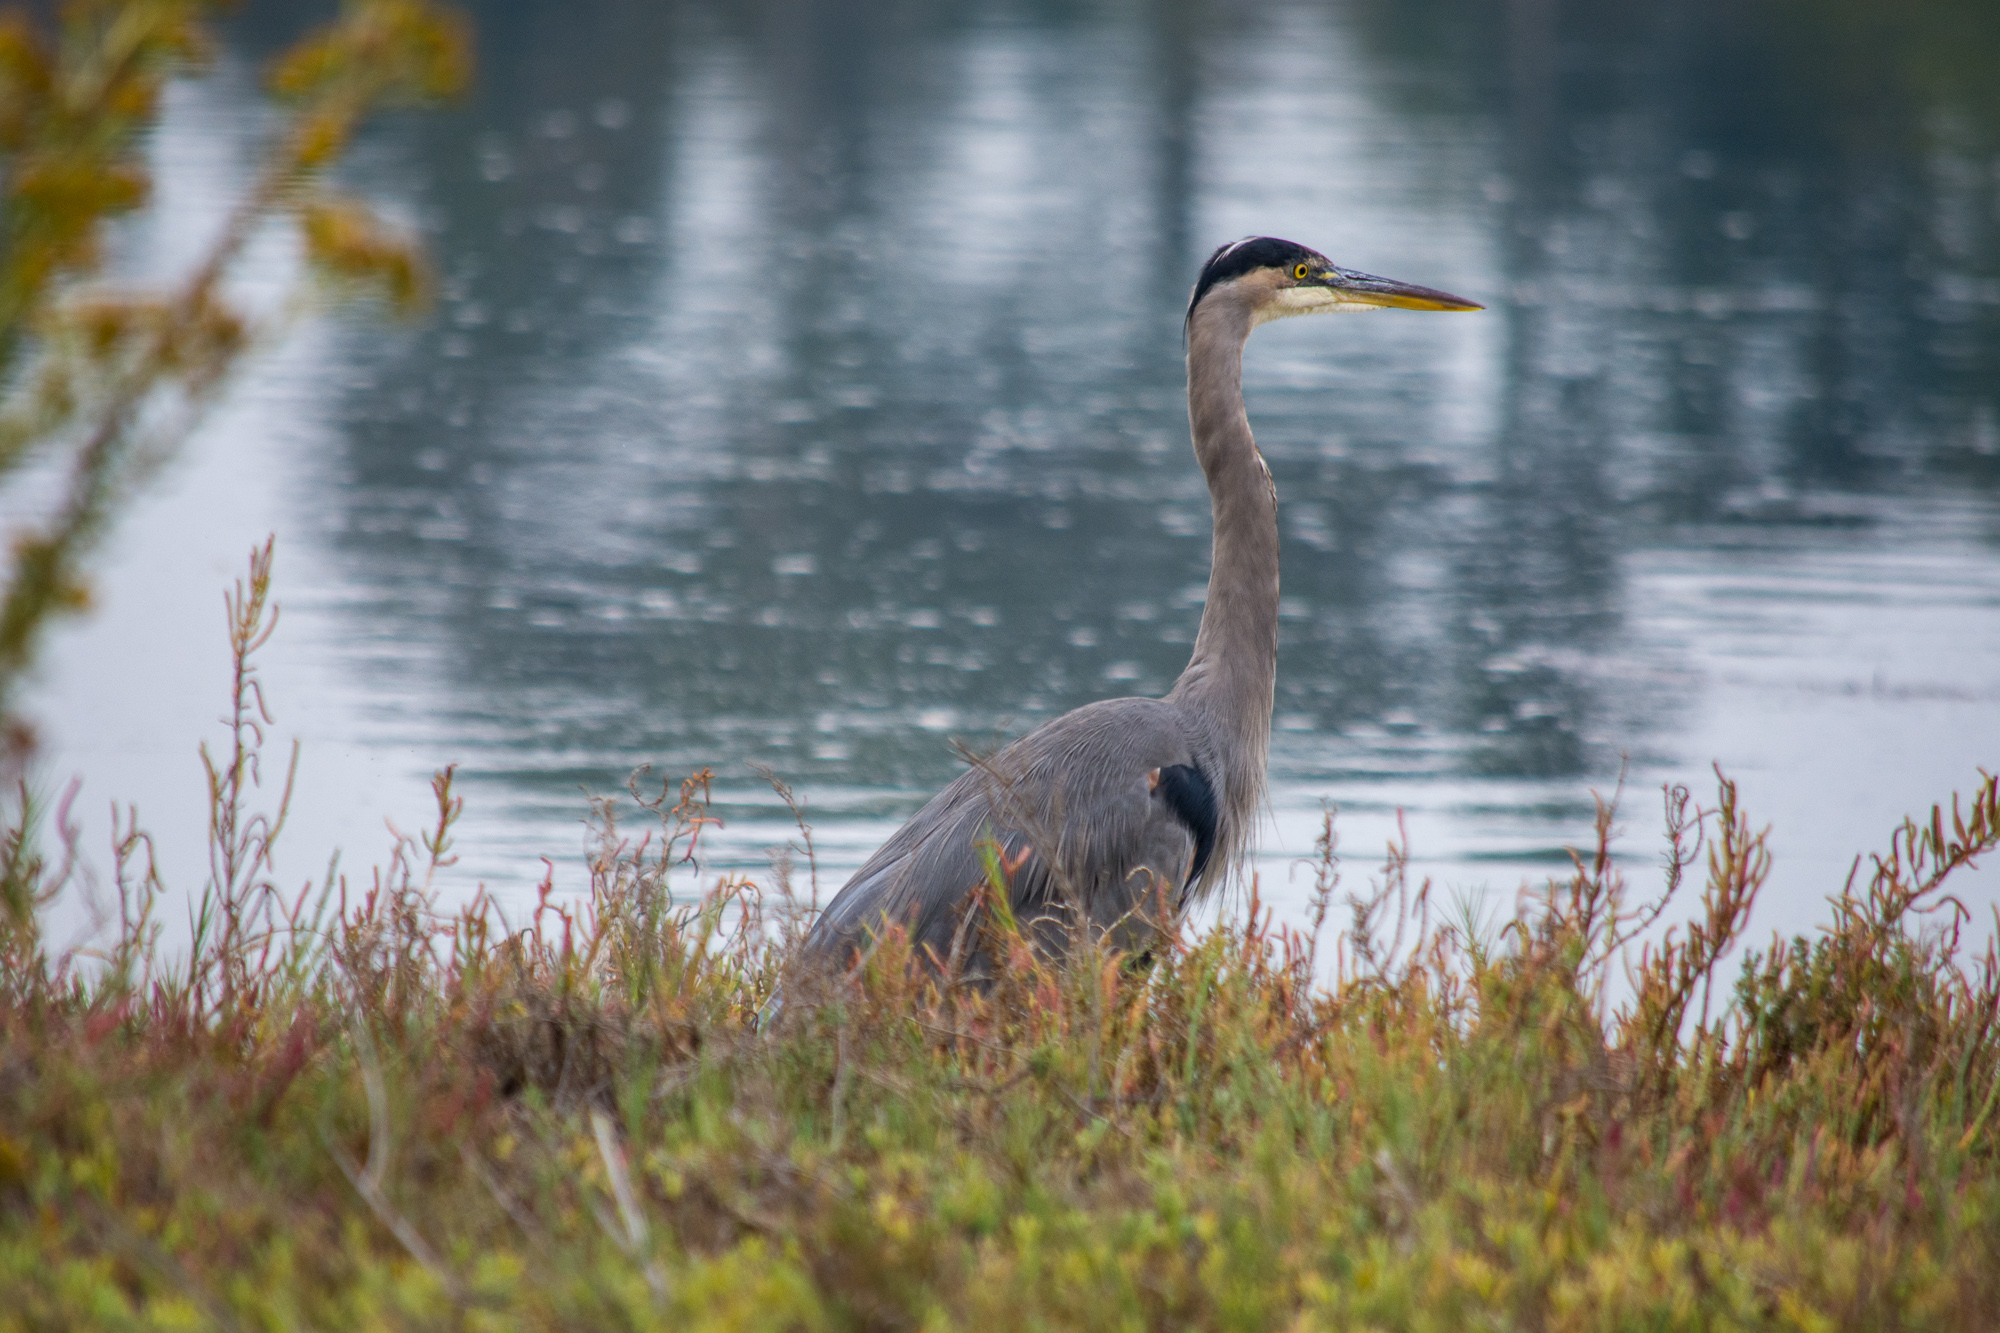 The blue heron scouts his domain